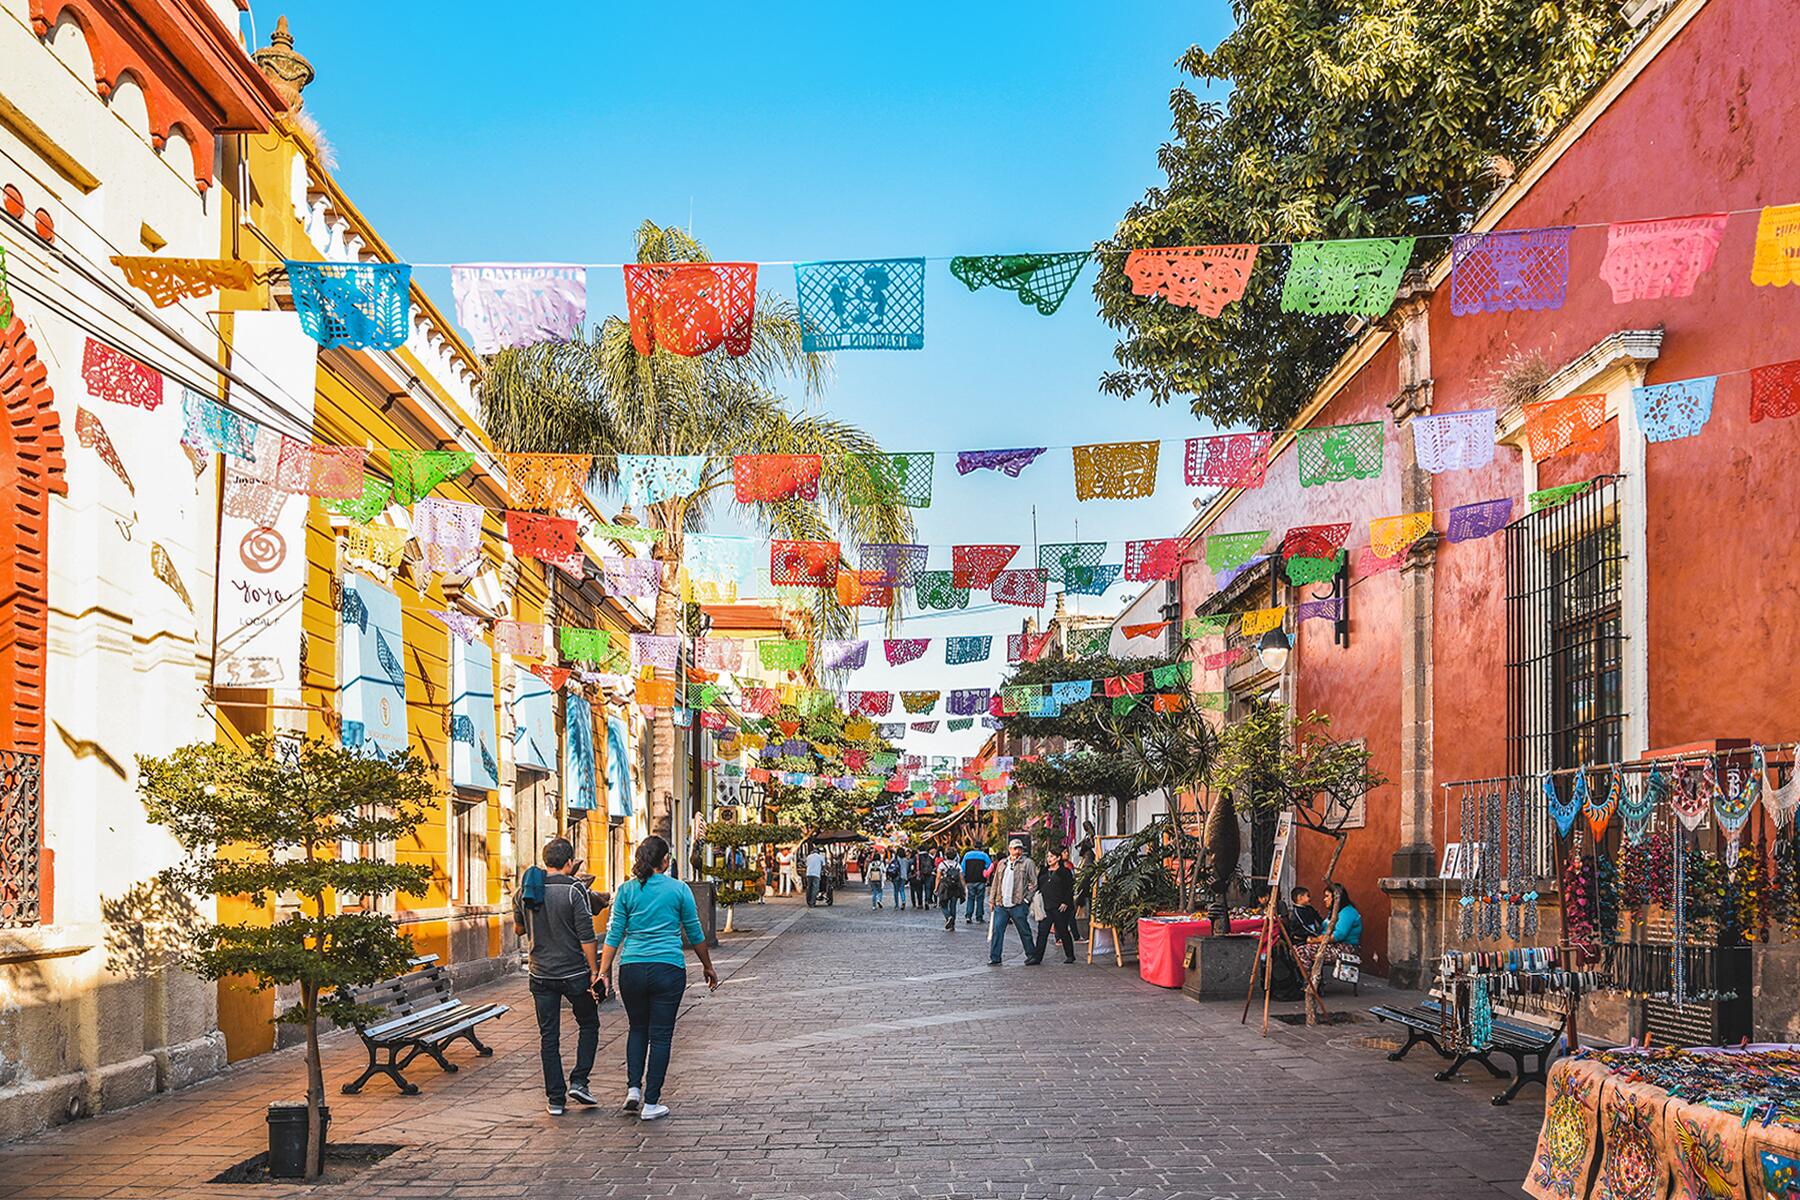 <a href='https://www.fodors.com/world/mexico-and-central-america/mexico/experiences/news/photos/dont-do-these-things-when-visiting-mexico#'>From &quot;17 Things Not Do When Visiting Mexico’s Coastal Towns&quot;</a>